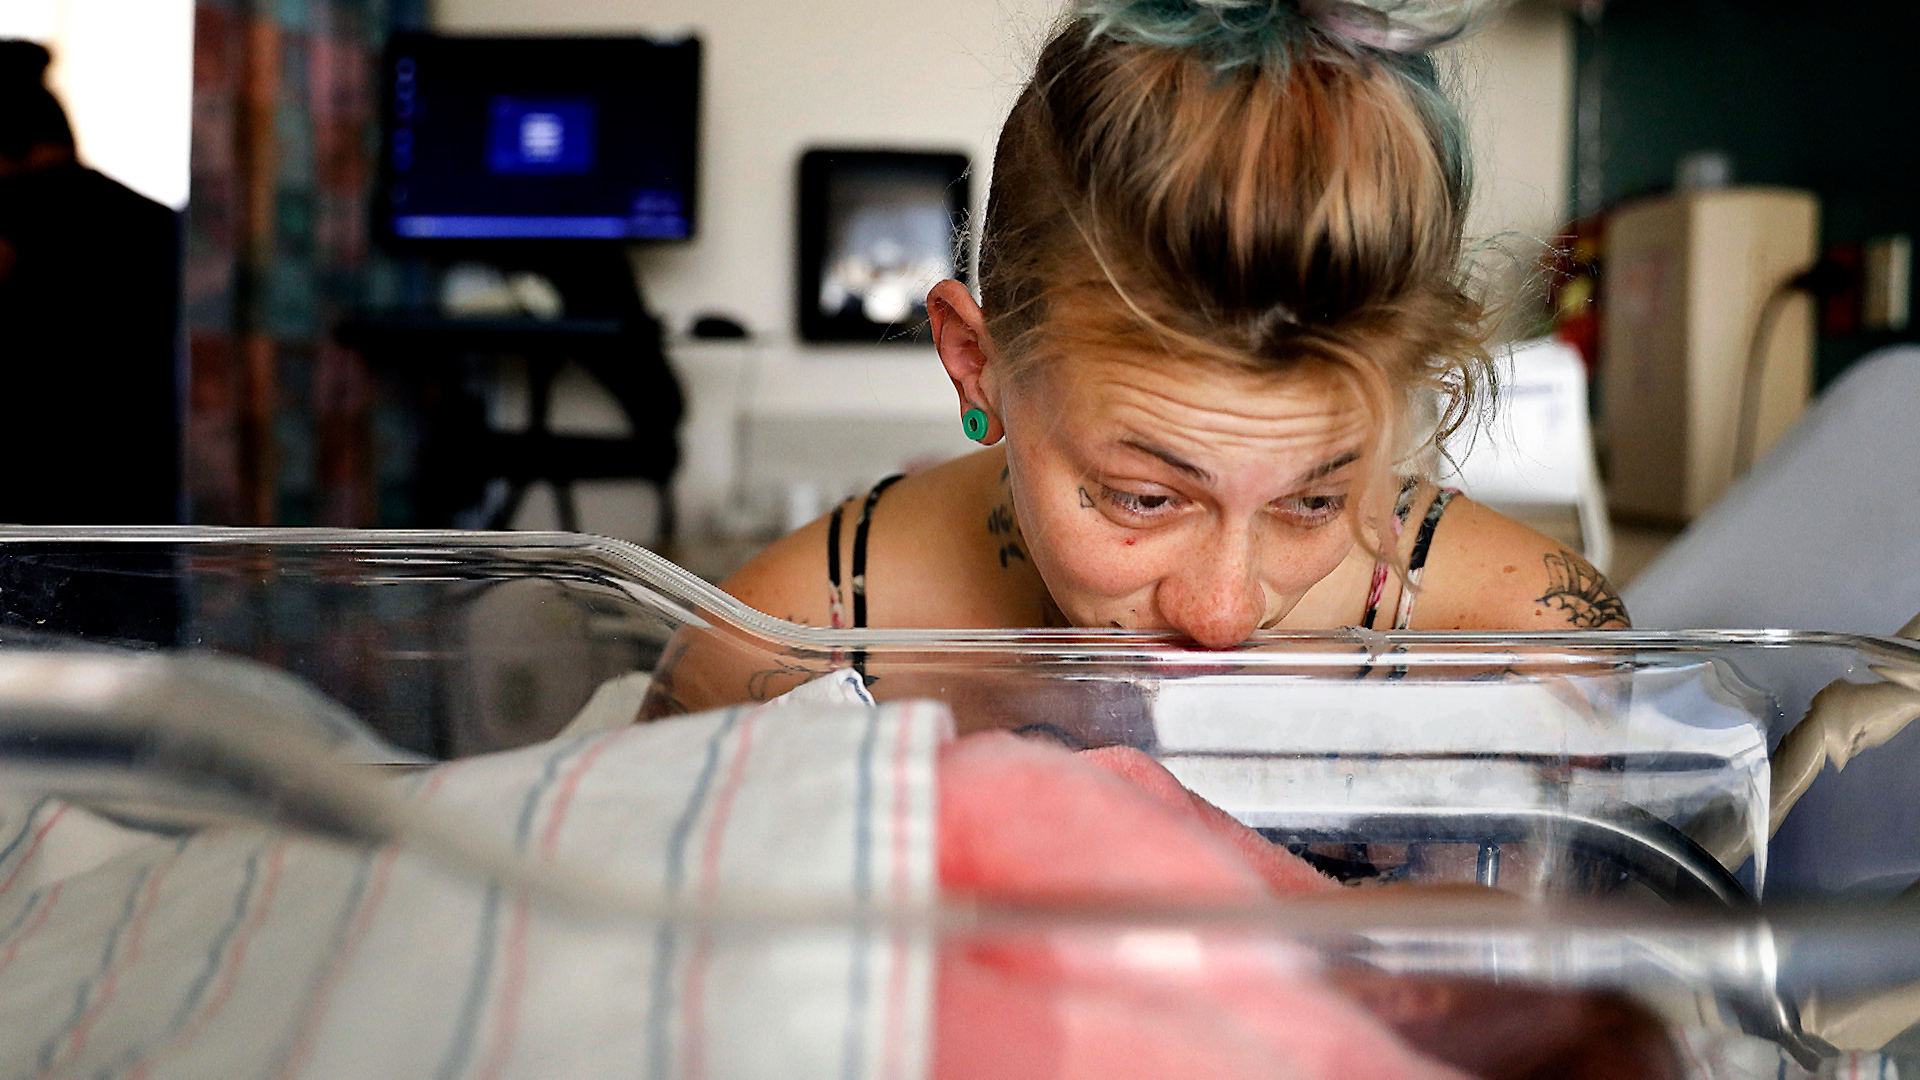 A young woman overlooks a newly born child.